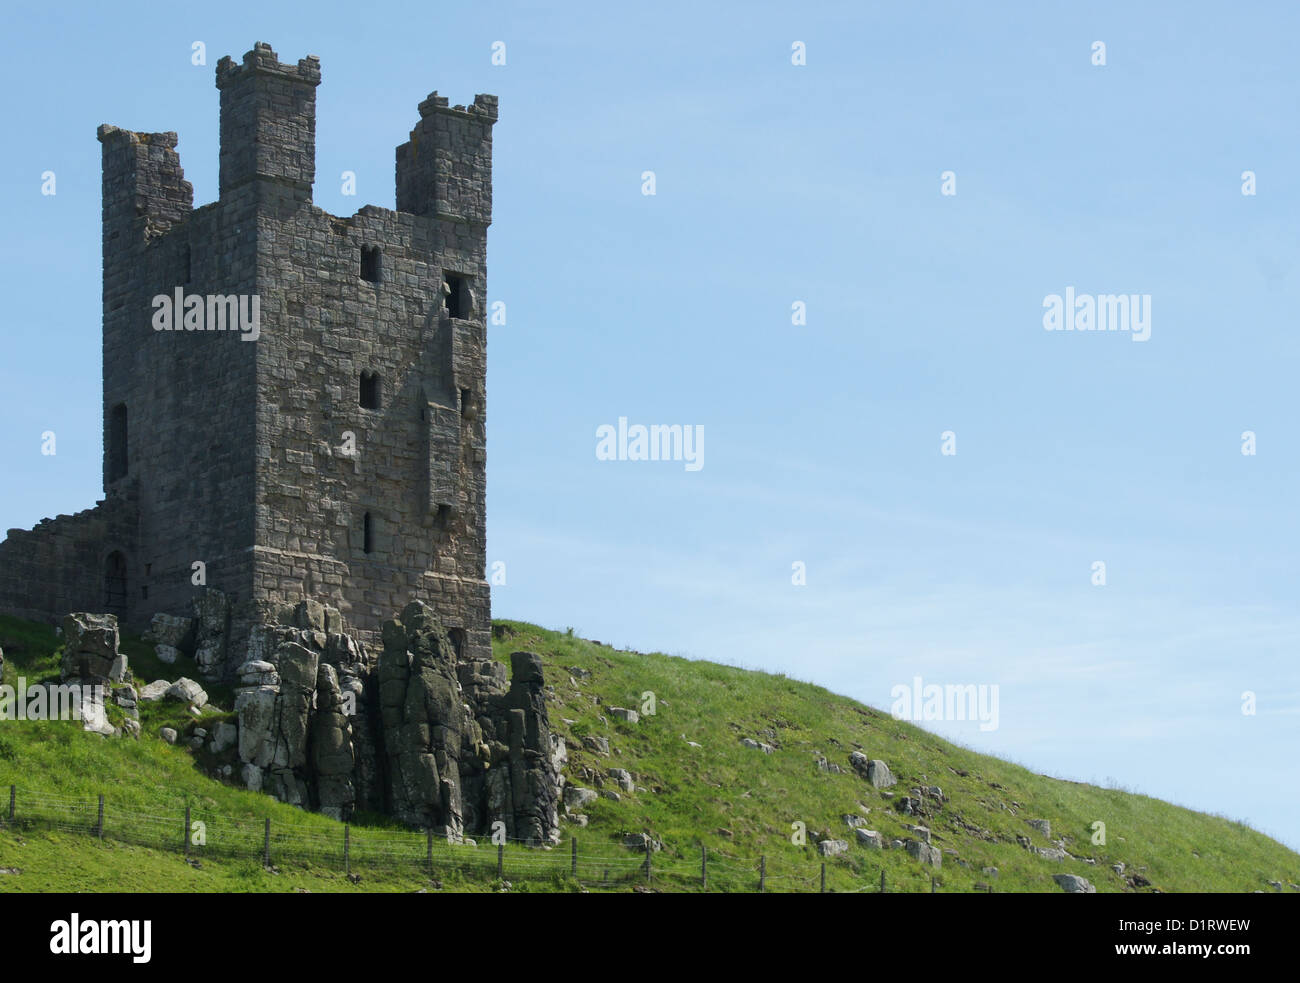 Old English Castle Ruin On A Hill Stock Photo